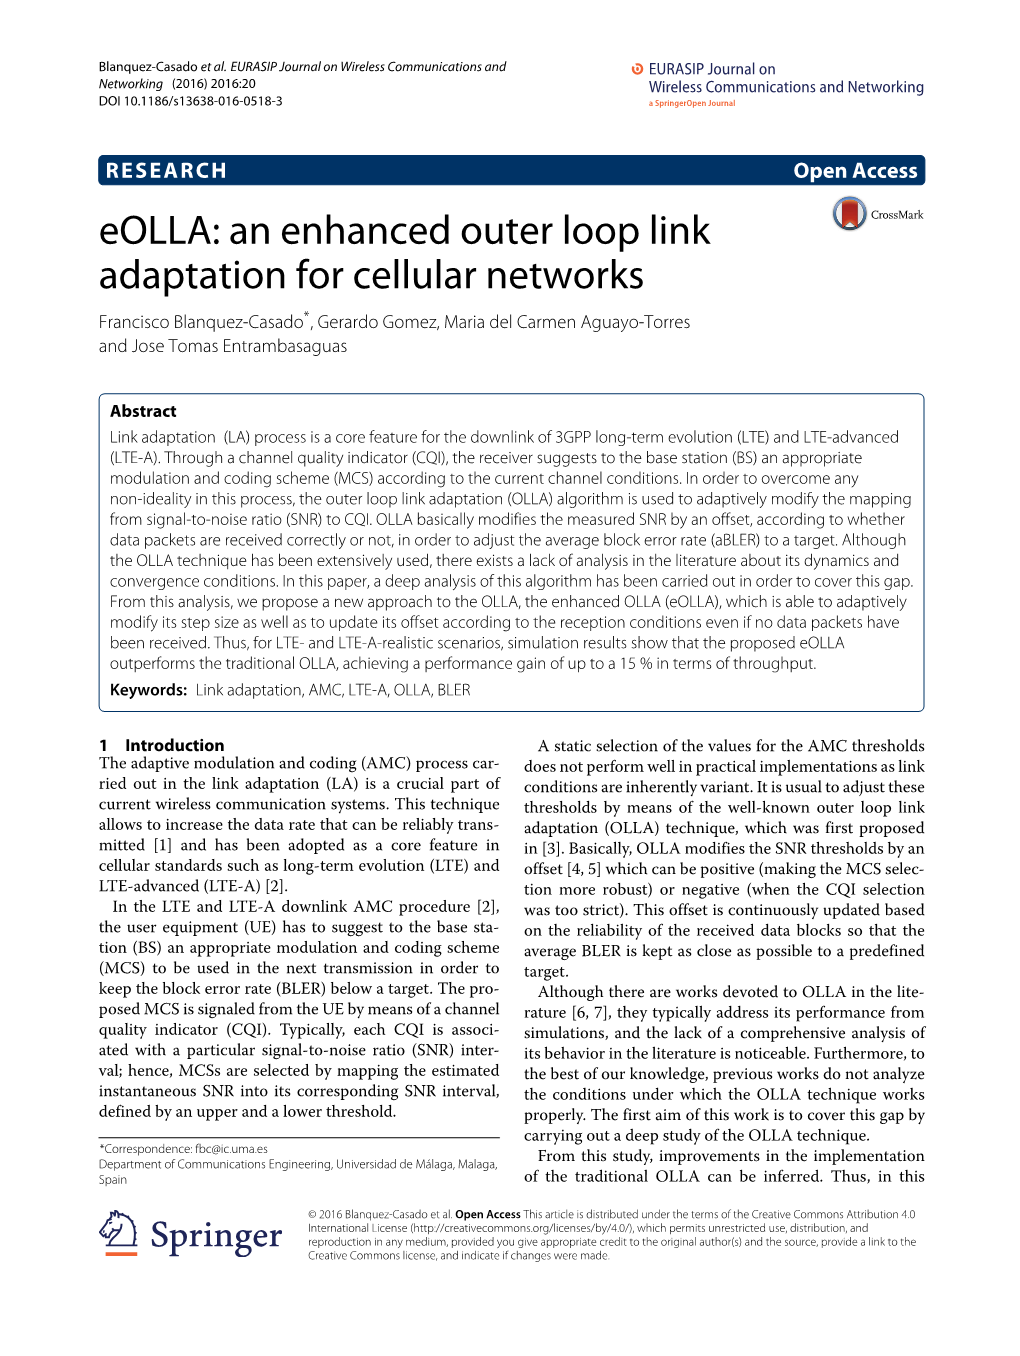 Eolla: an Enhanced Outer Loop Link Adaptation for Cellular Networks